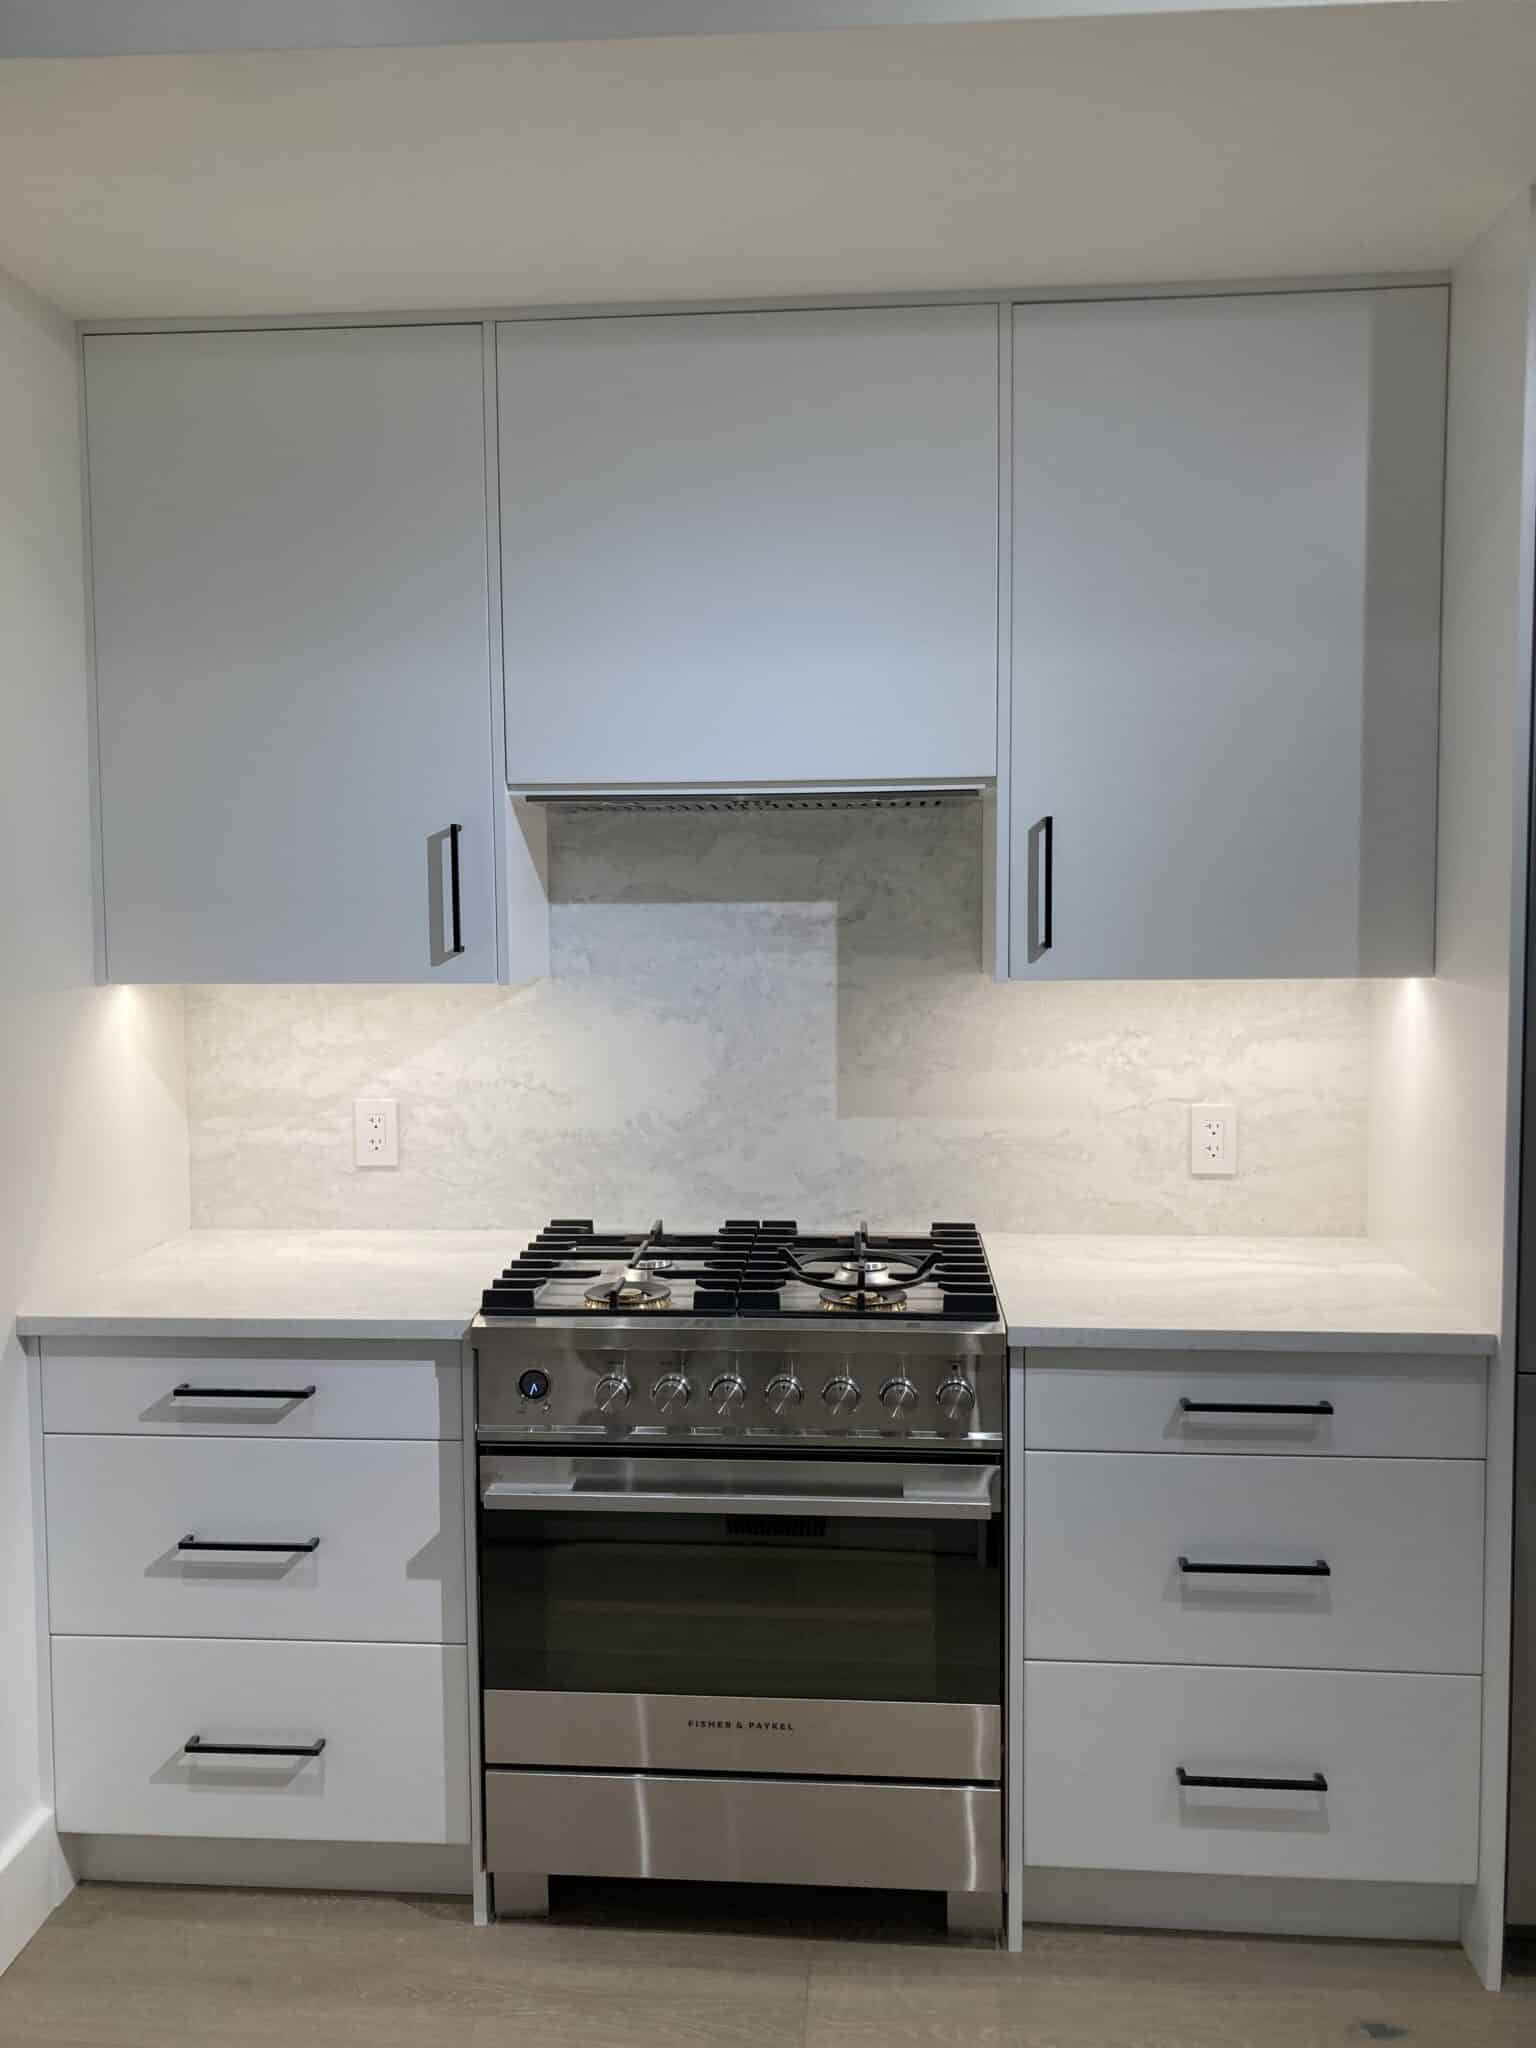 An oven and stove with white cabinets